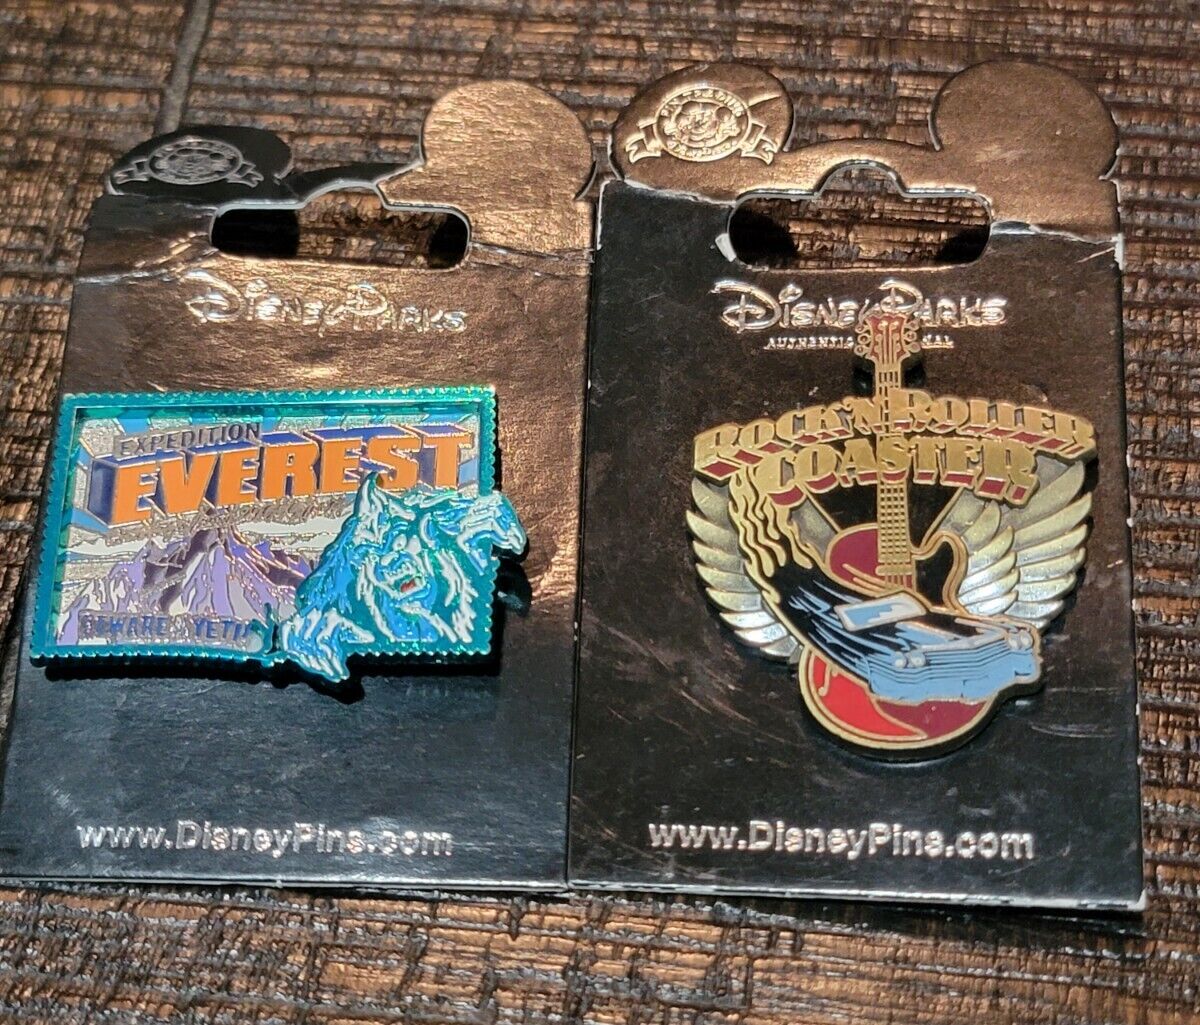 DISNEY PINS EXPEDITION EVEREST AND ROCK'N ROLLER COASTER 